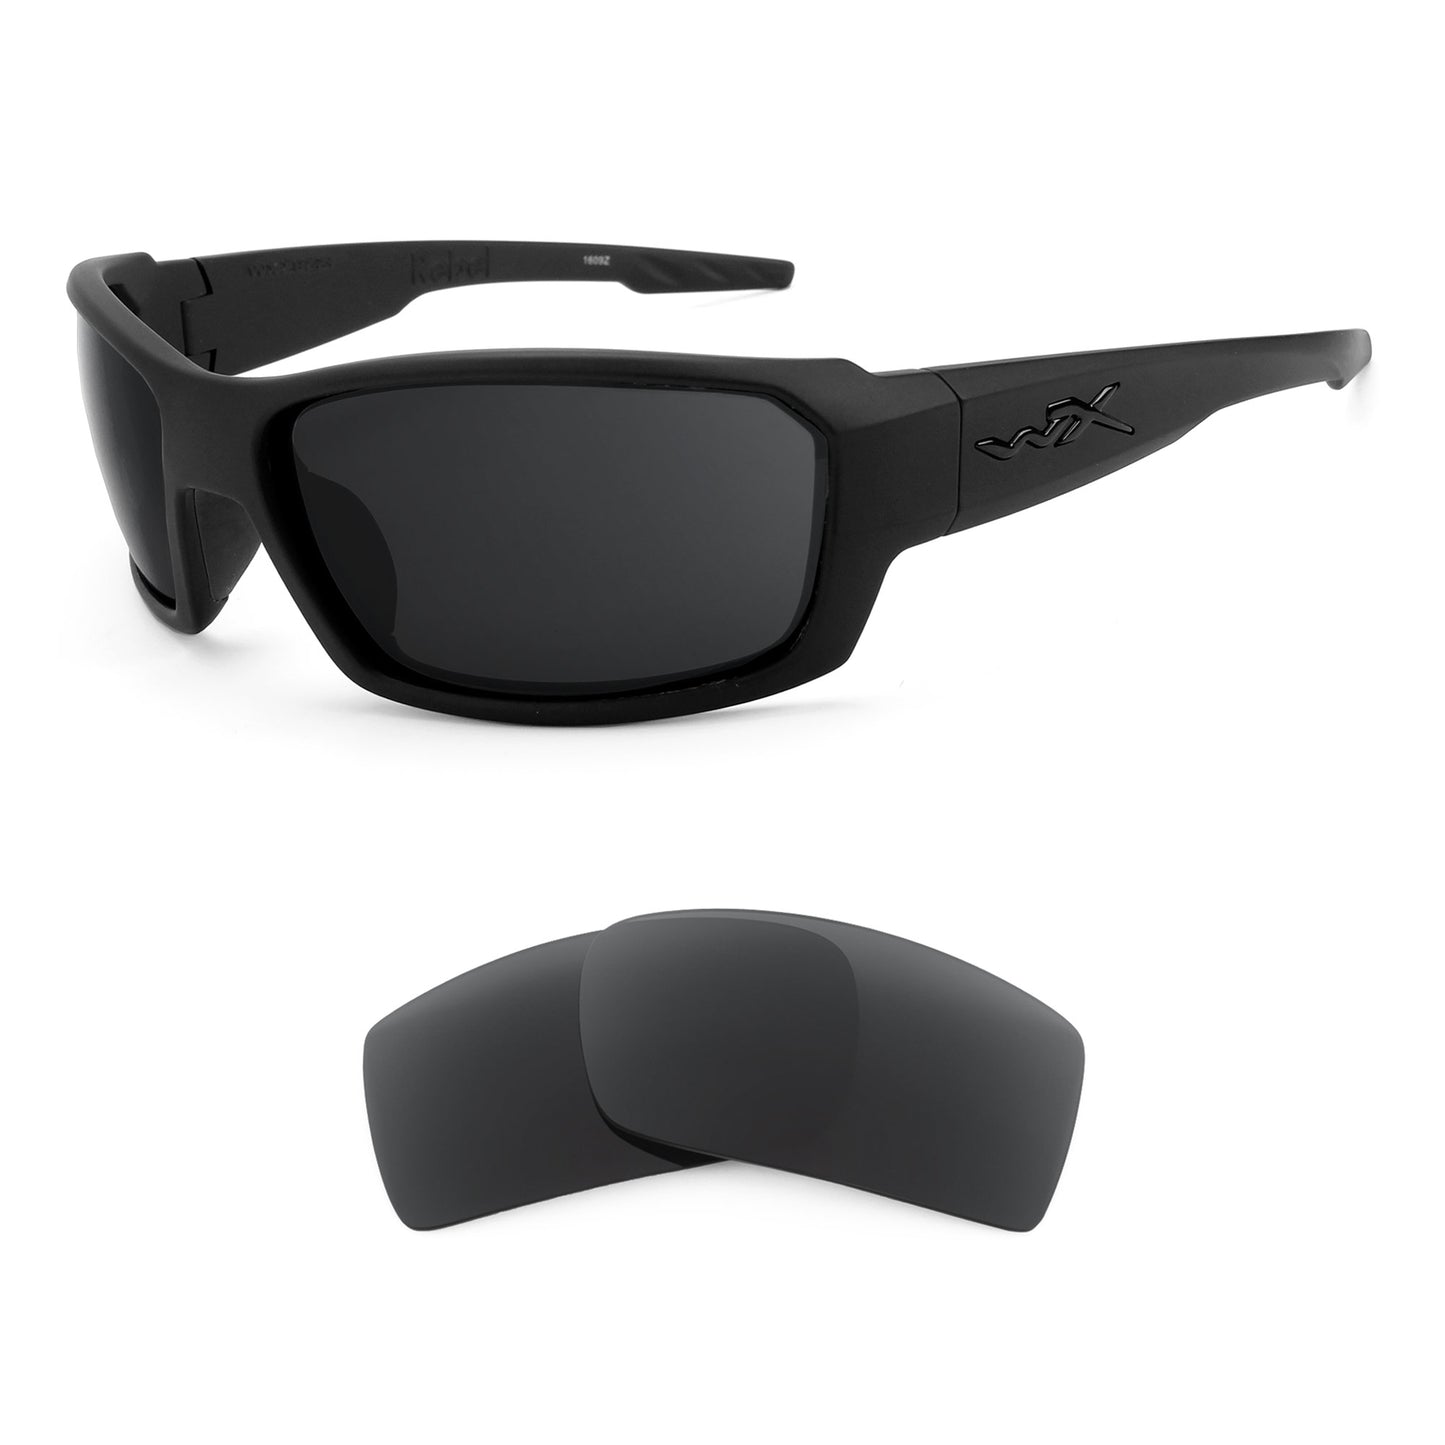 Wiley X Rebel sunglasses with replacement lenses